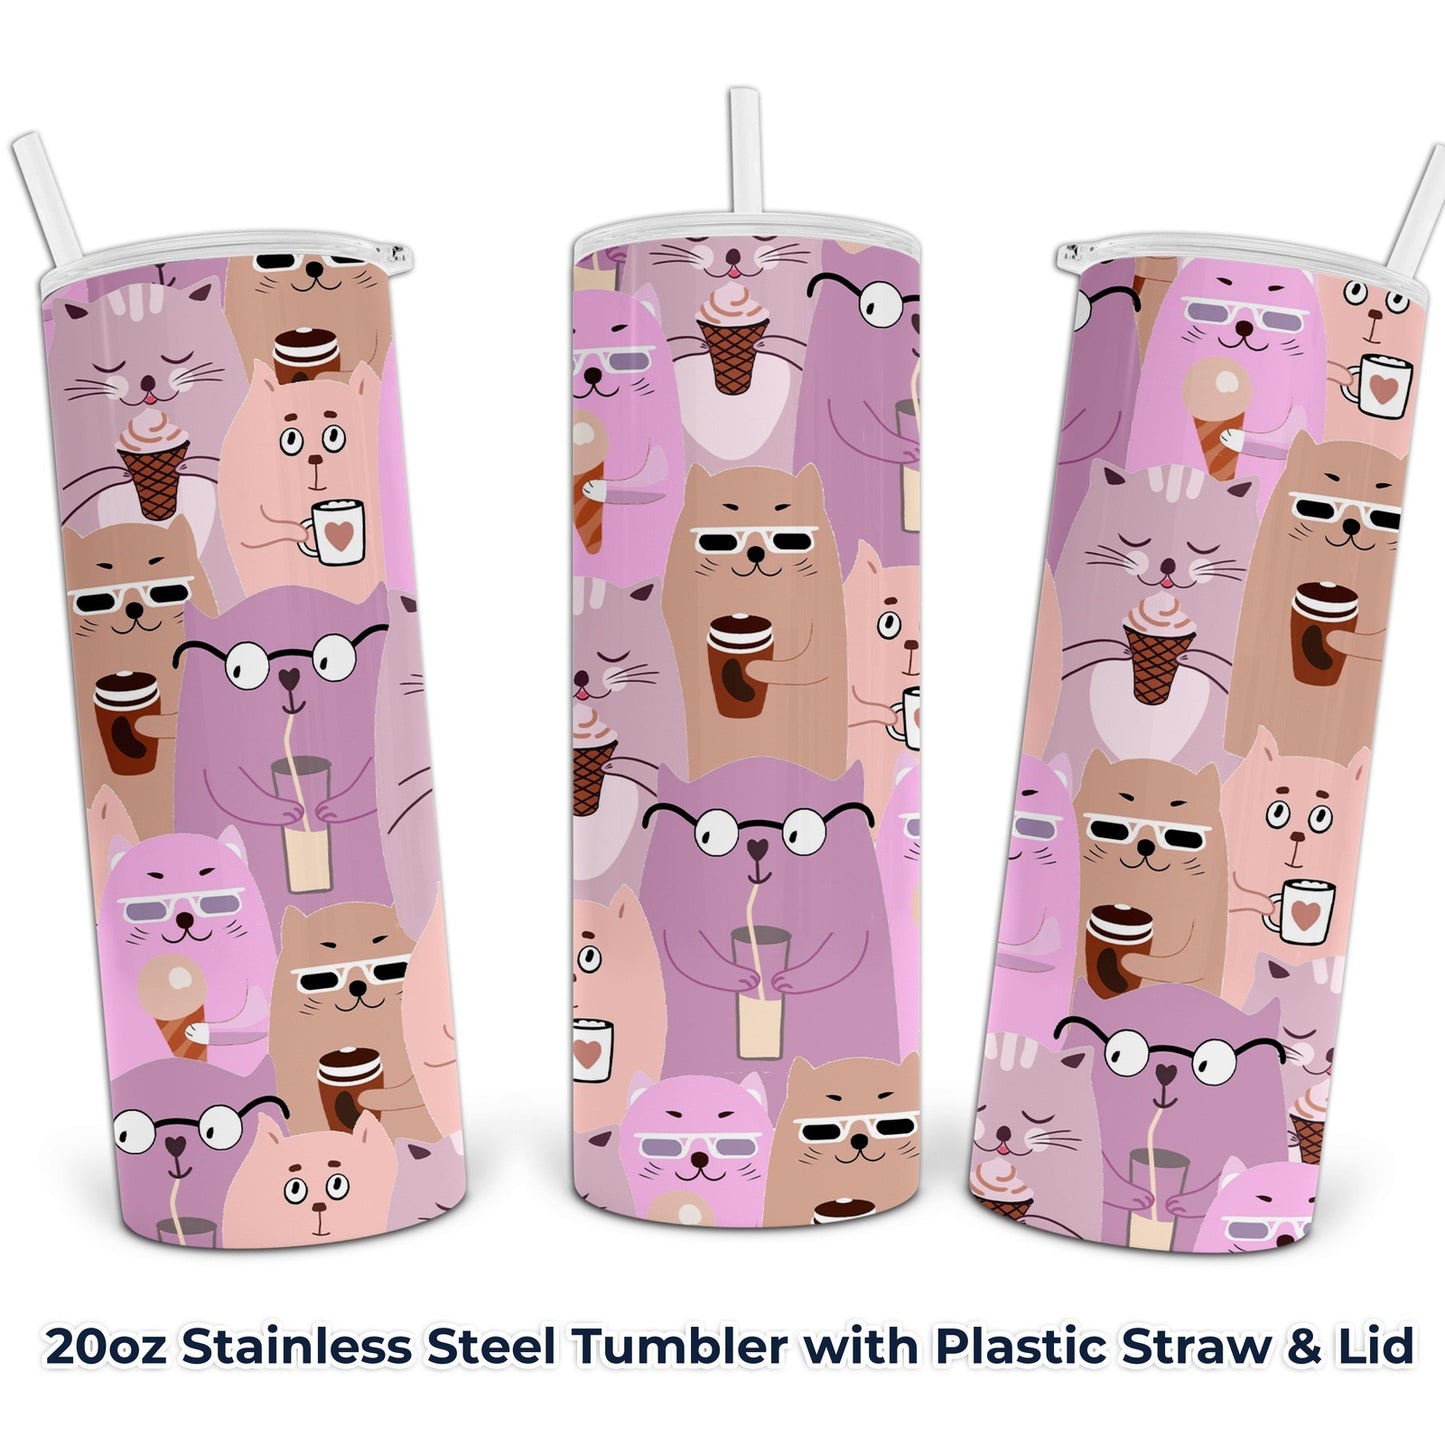 Purple Kitty Cat Collage Design - 20oz Stainless Steel Tumbler with Lid and Straw